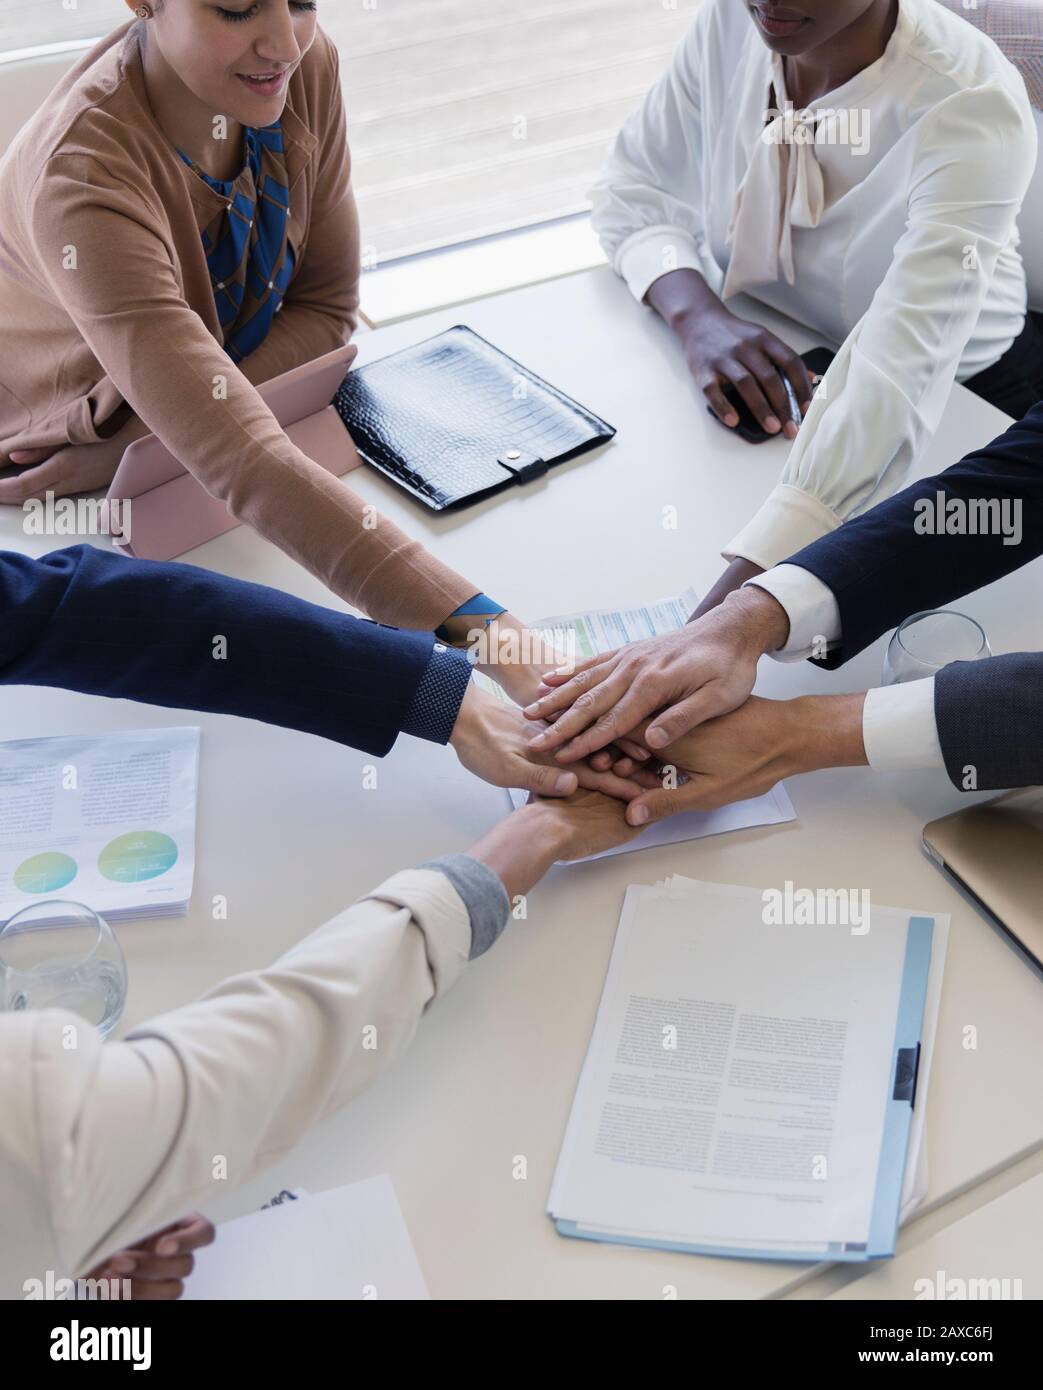 Business people joining hands in conference room meeting Stock Photo